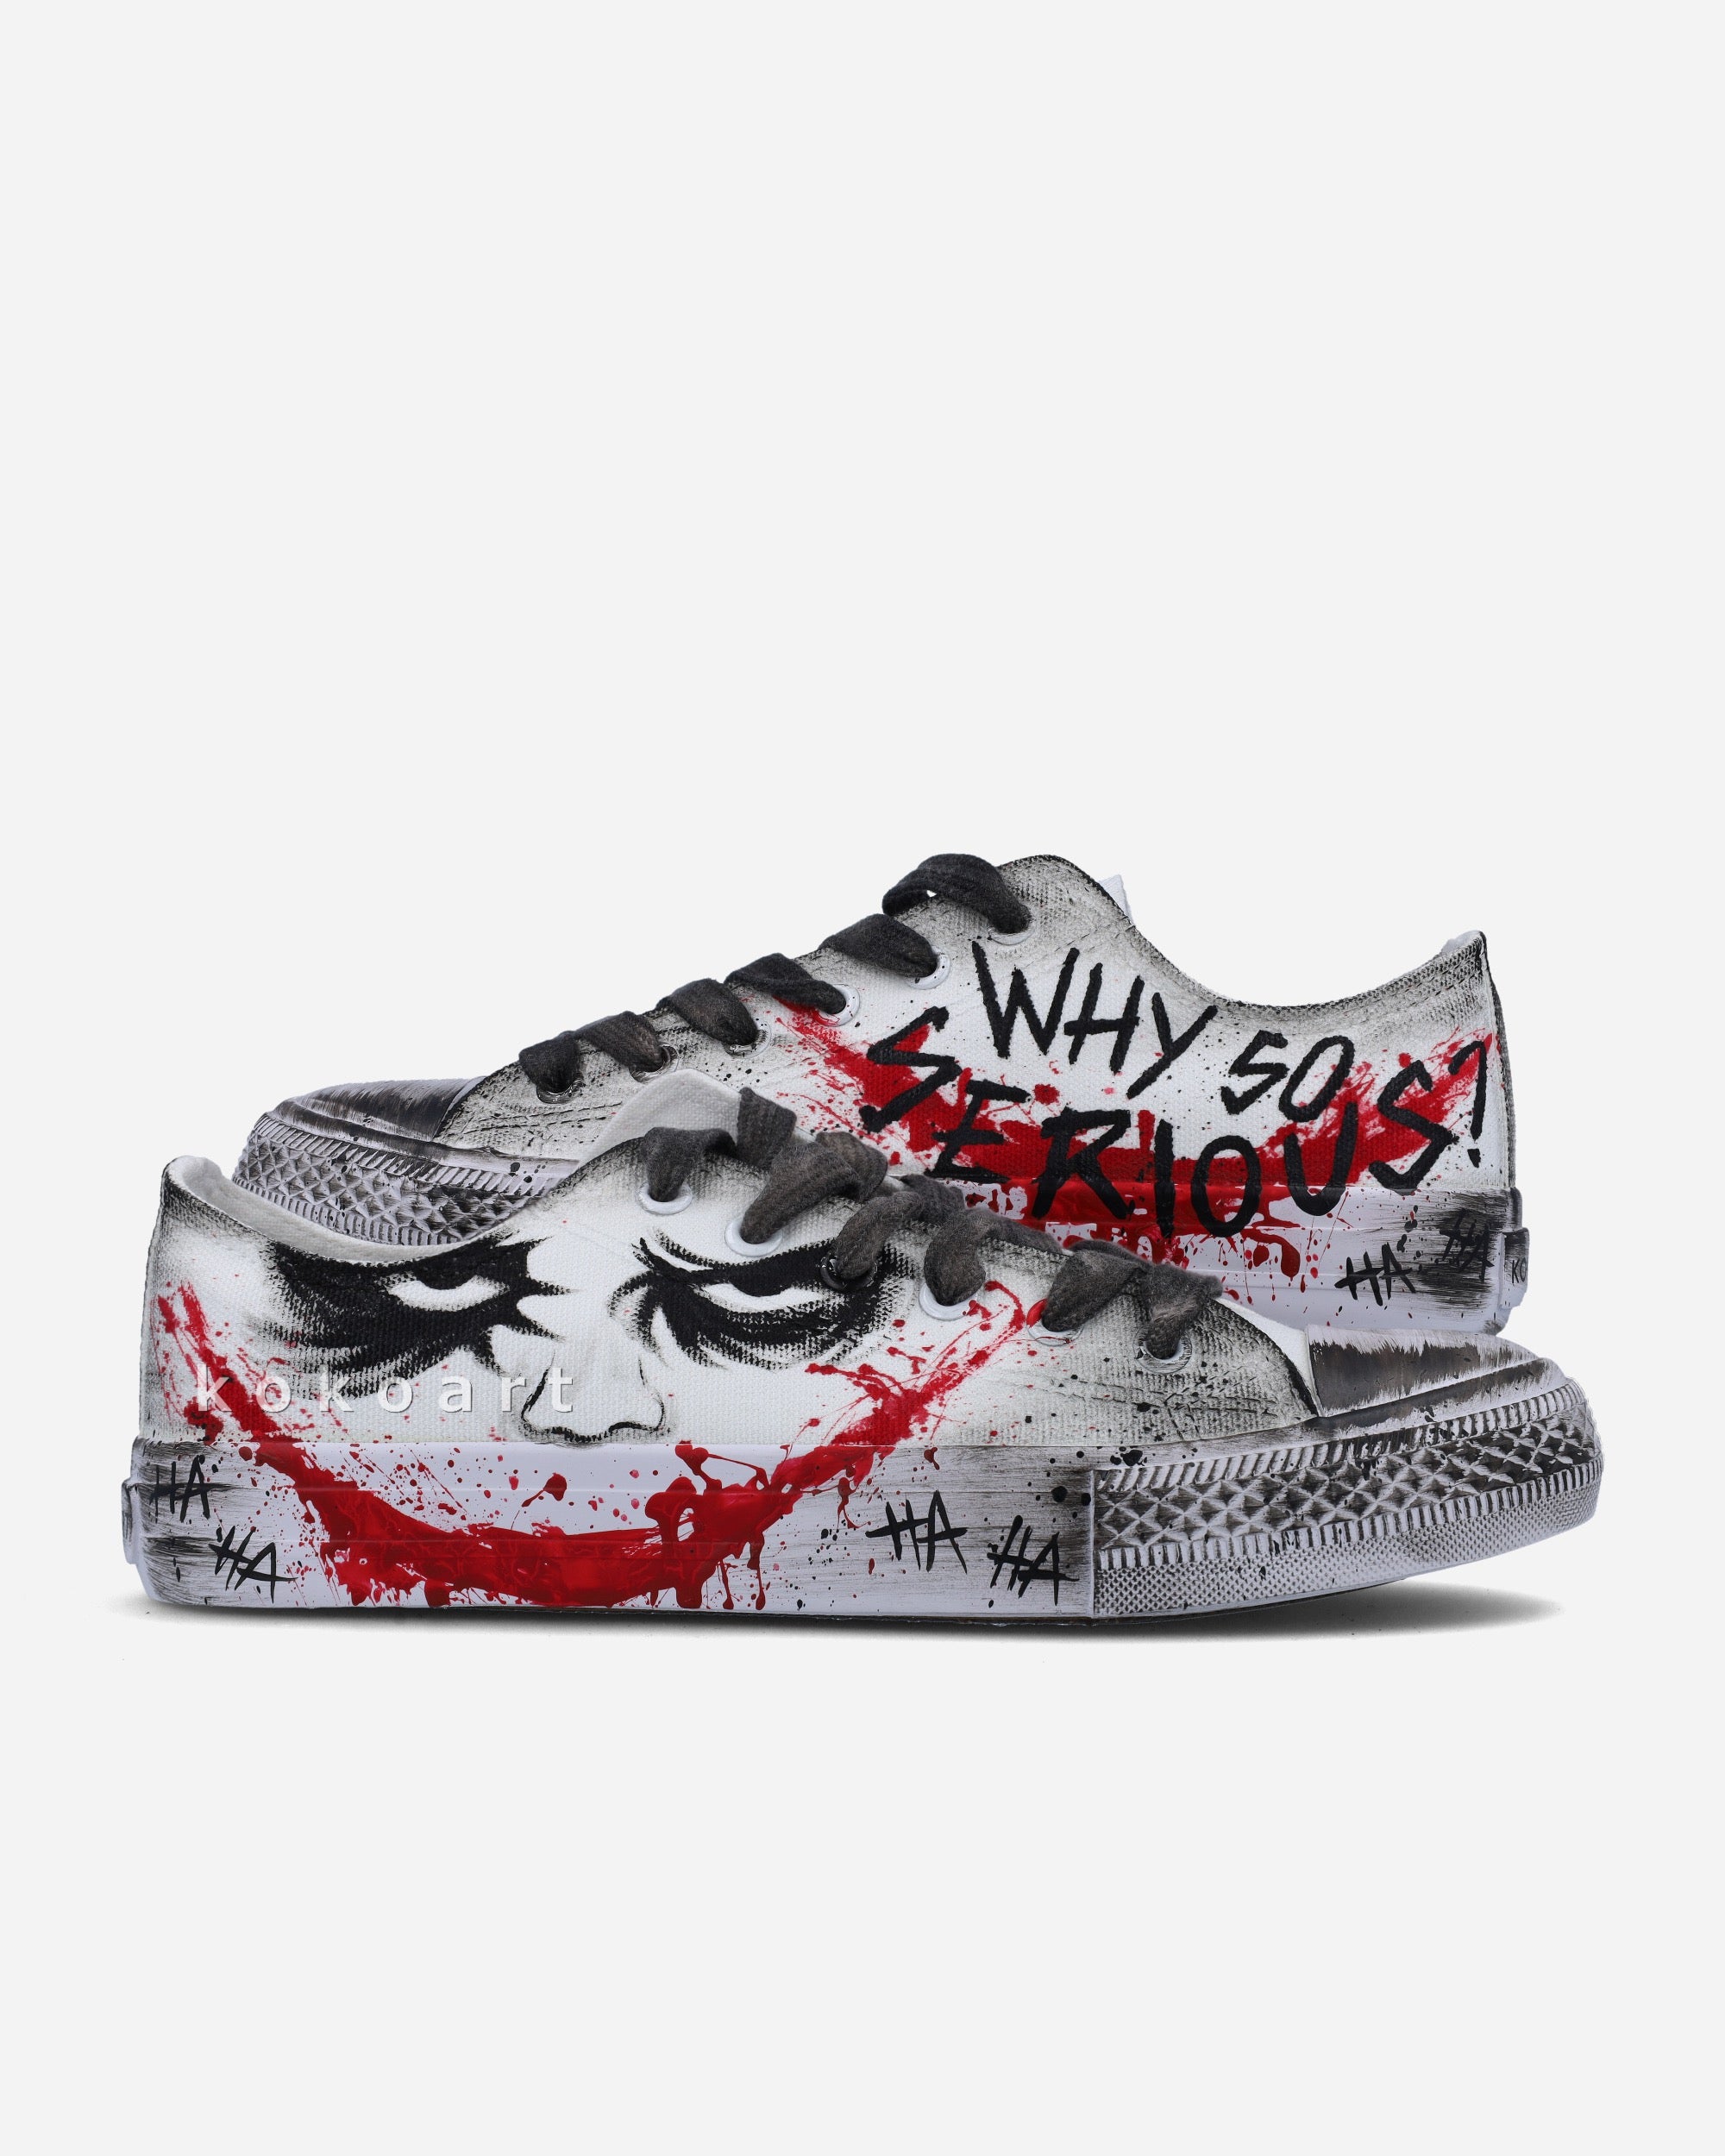 Joker Hand Painted Shoes